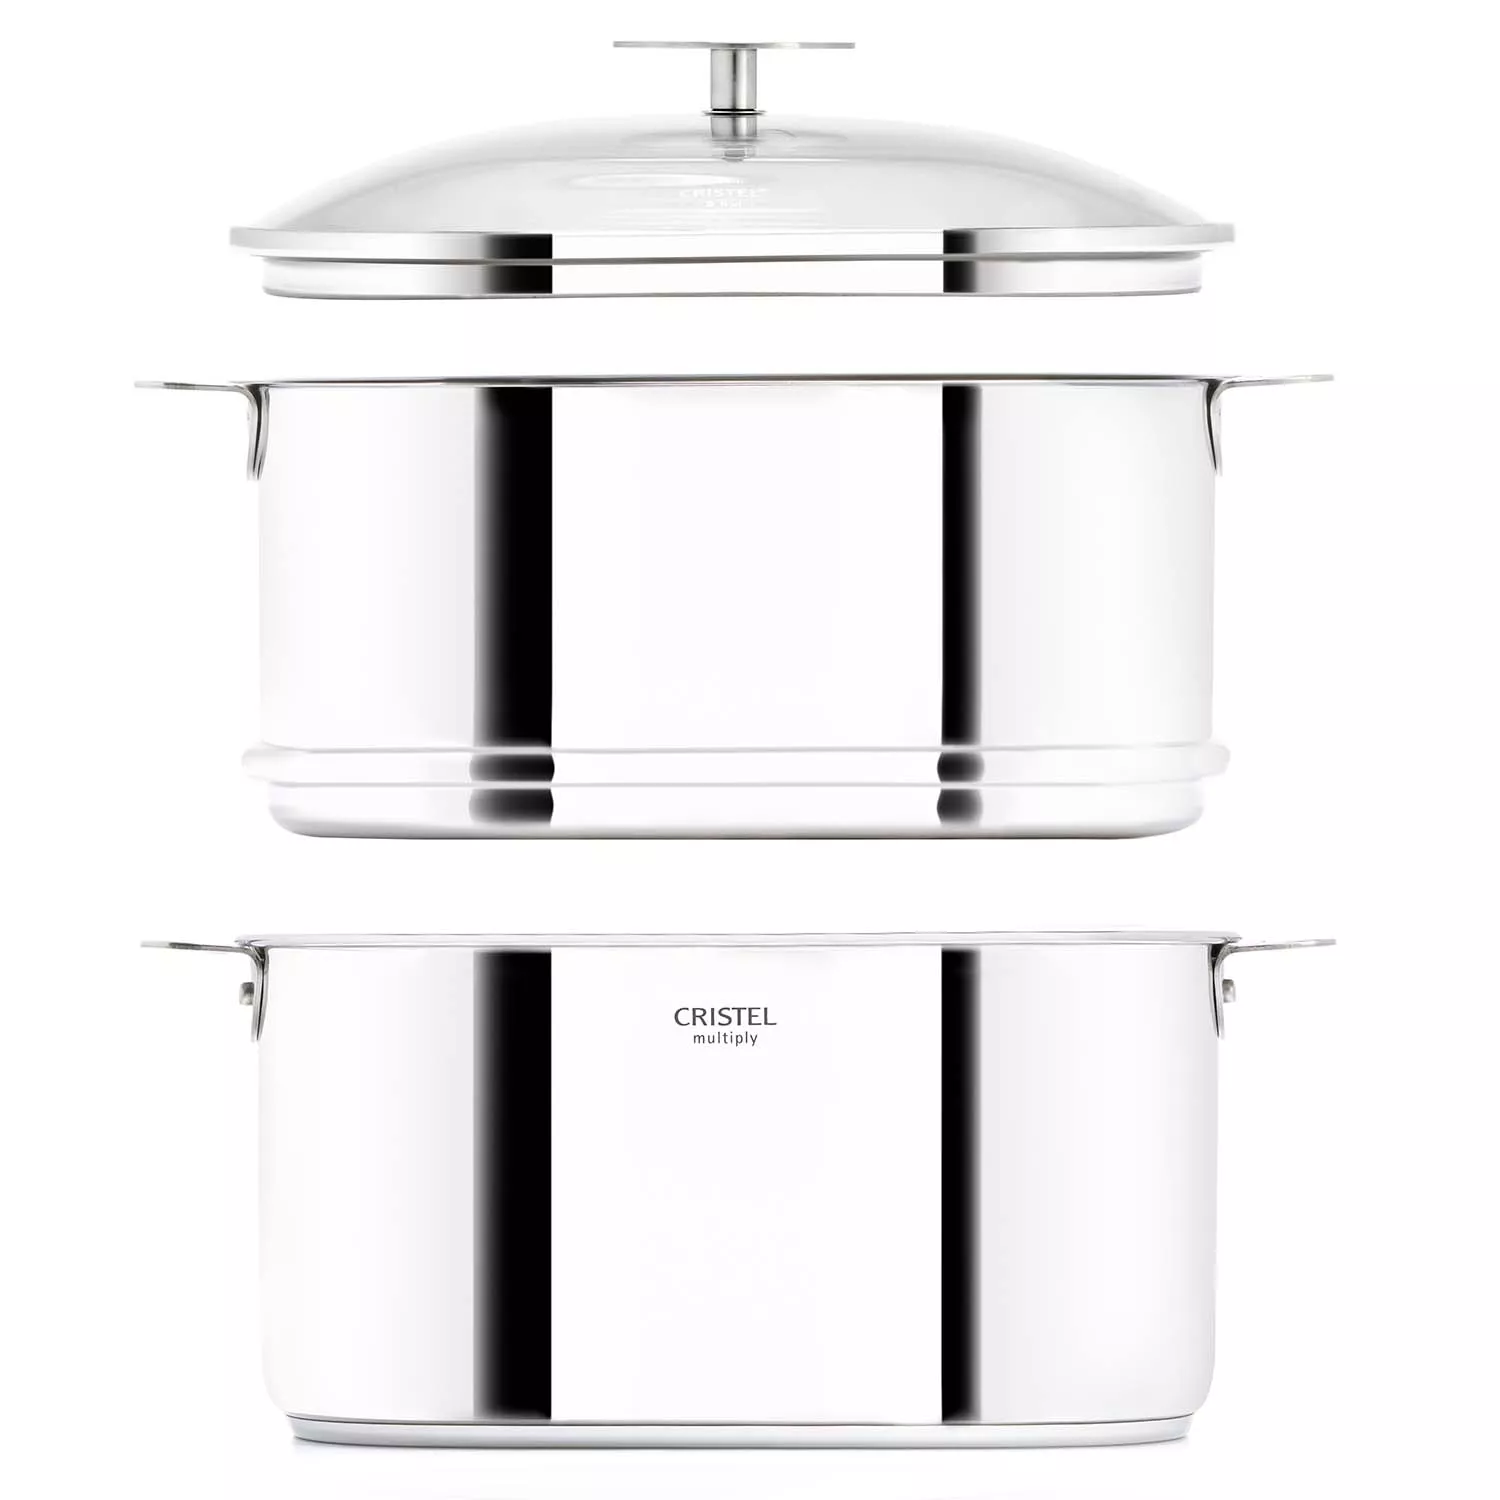 9.5Qt. Stainless Steel Food Steamer